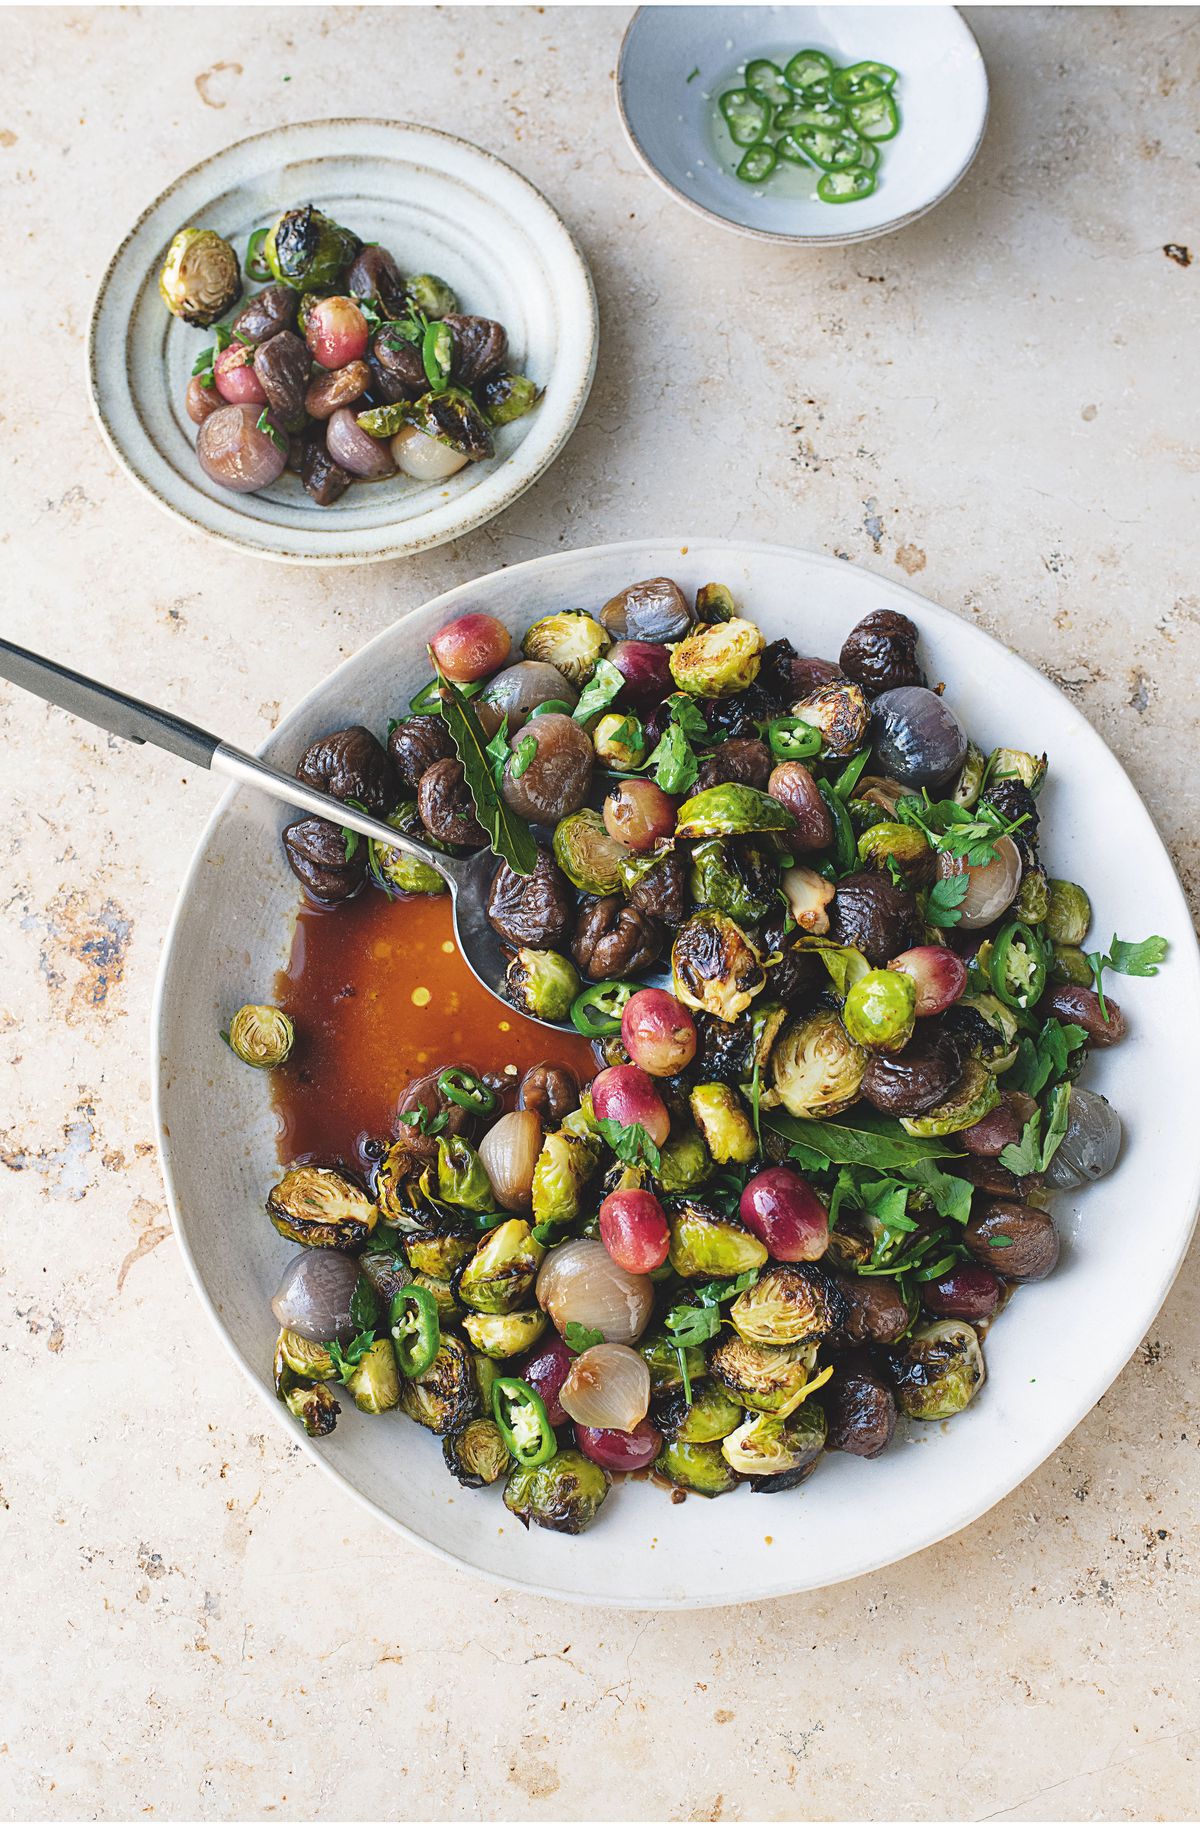 Yotam Ottolenghi’s Sweet and Sour Sprouts with Chestnuts and Grapes